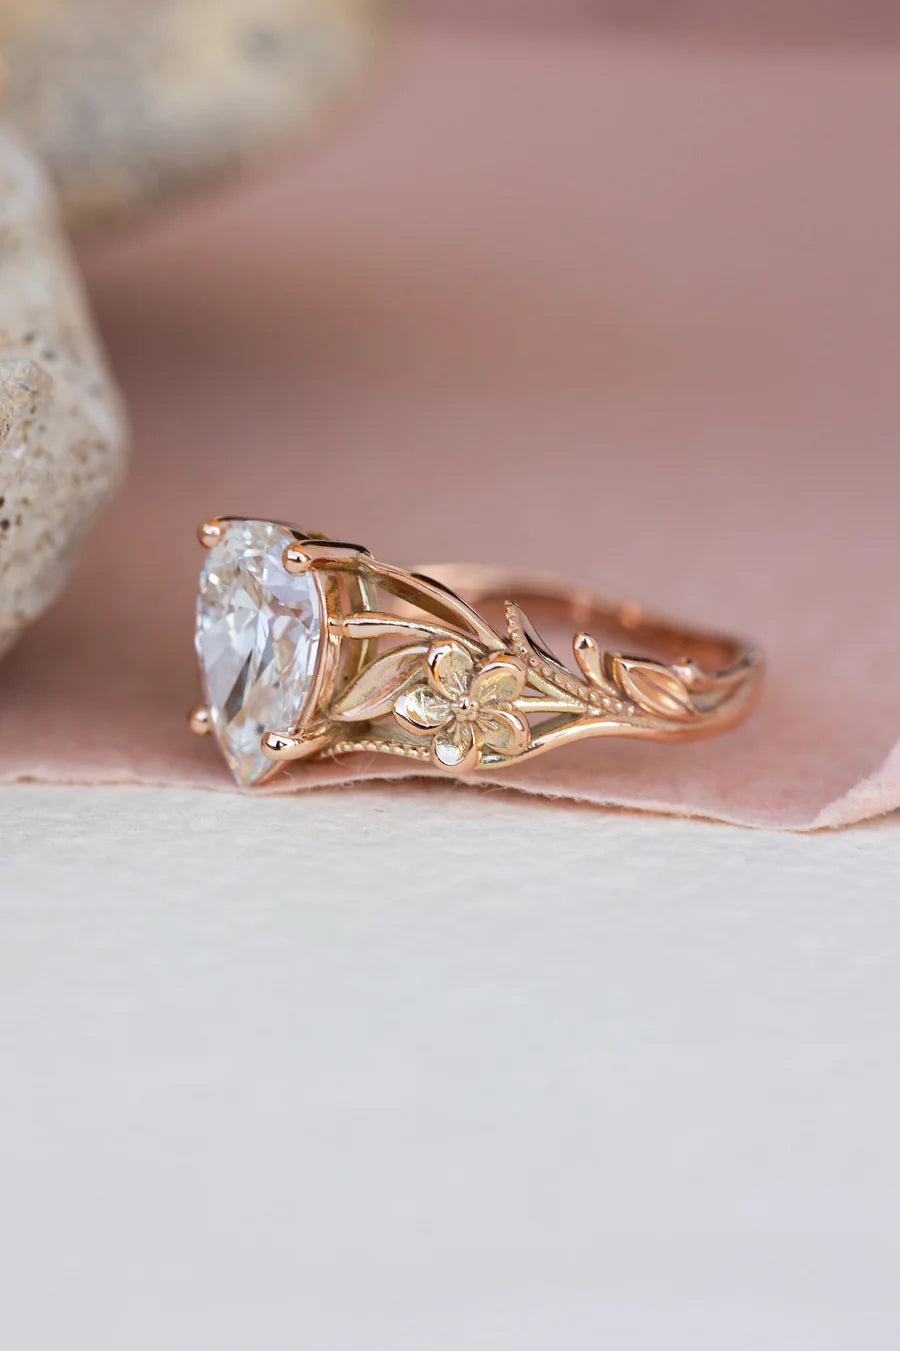 READY TO SHIP: Eloise engagement ring in 14K rose gold, big lab grown diamond, 10x7 mm, AVAILABLE RING SIZES: 5.75-7.75 US